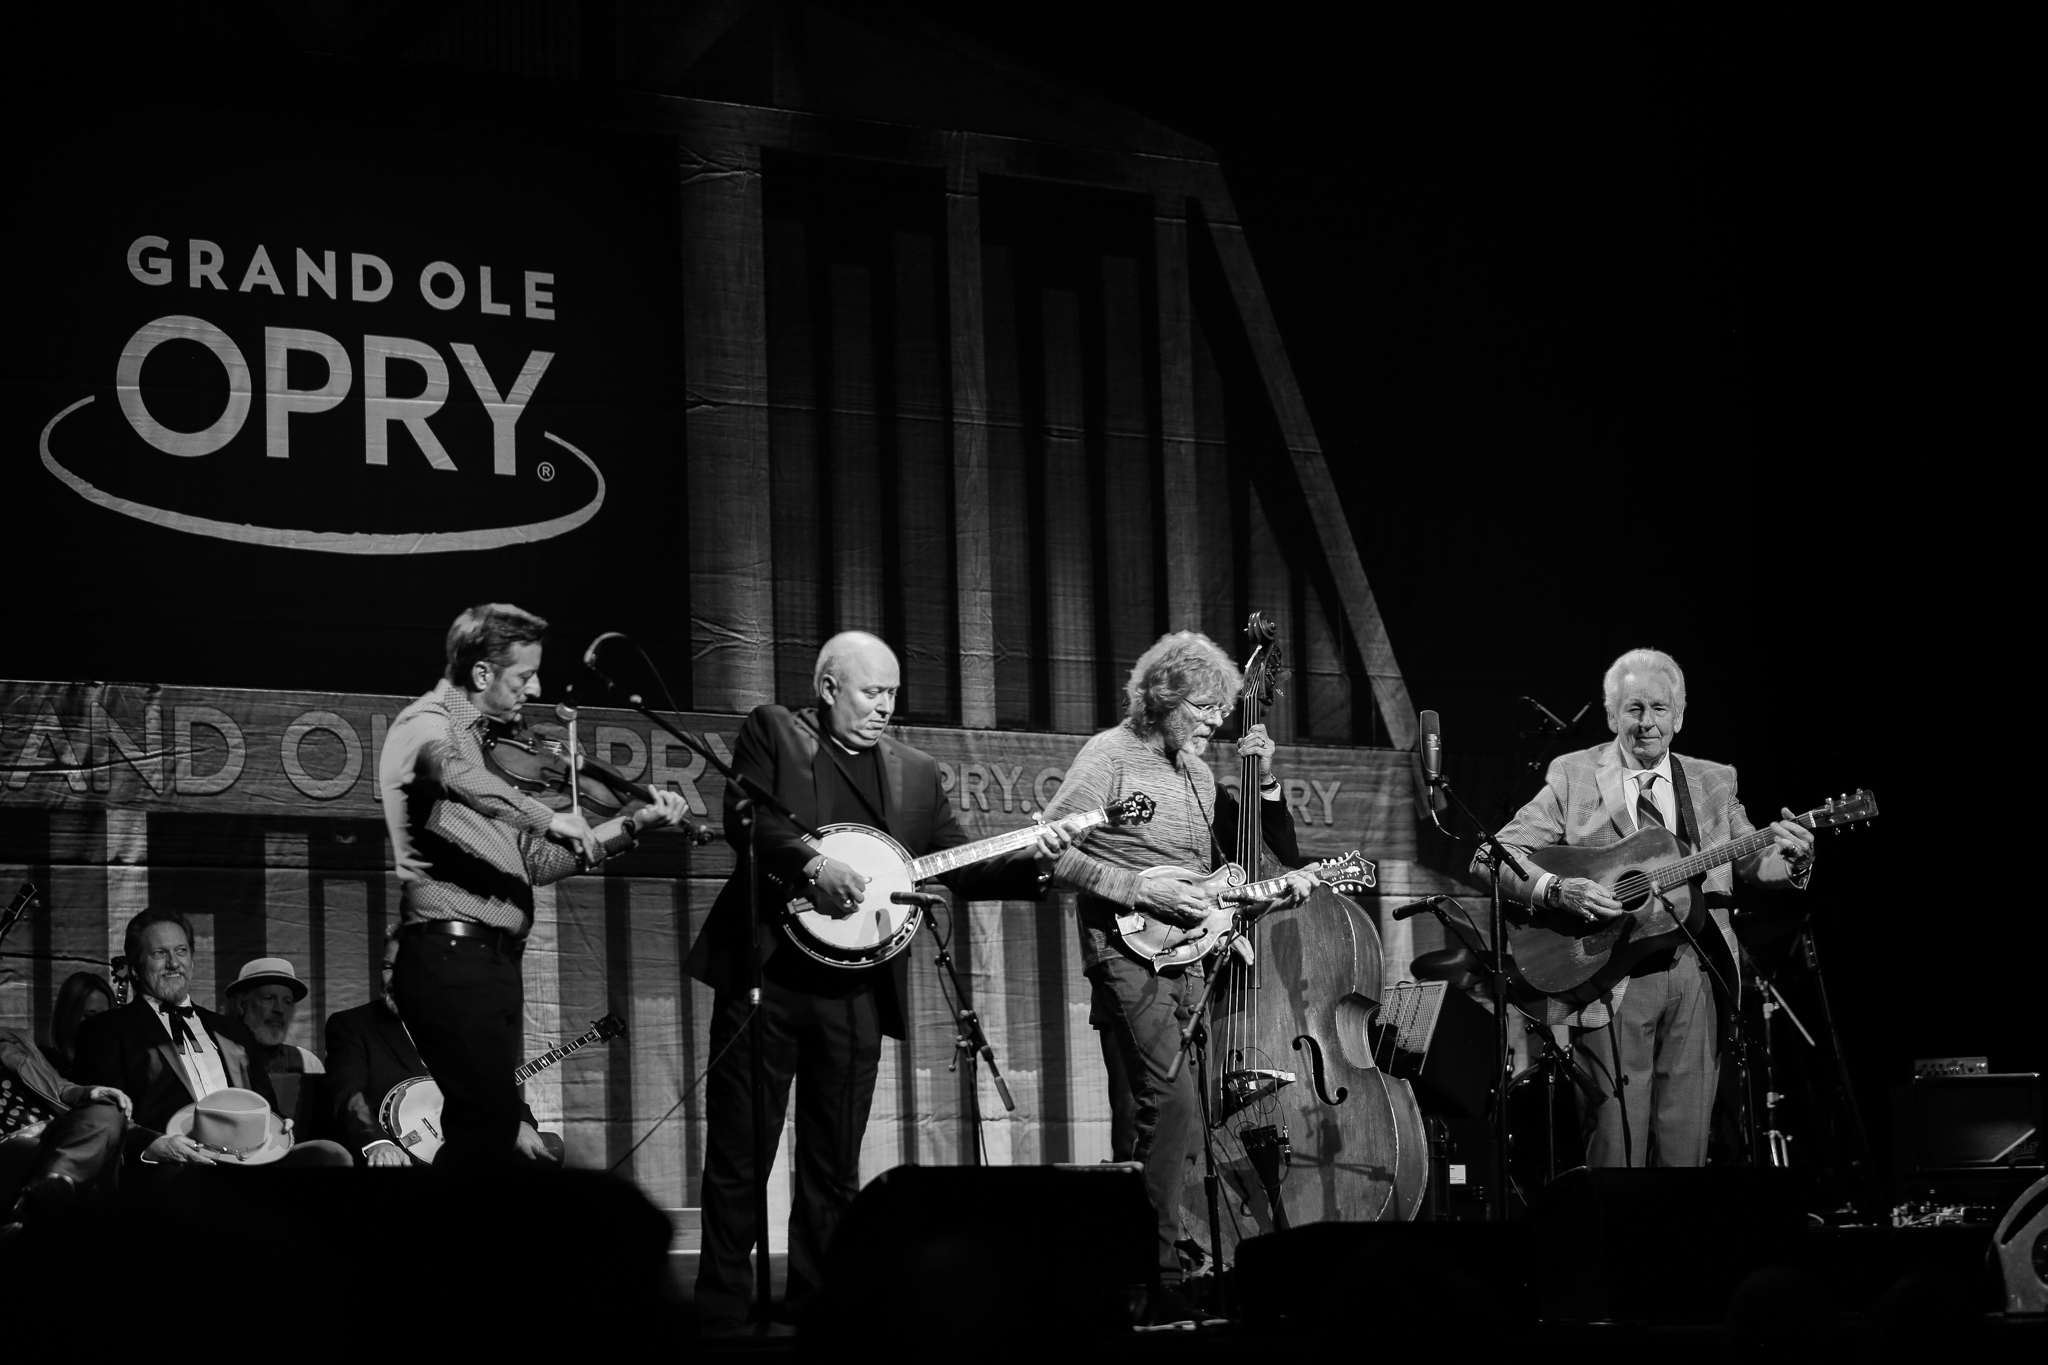 The Grand ole Opry is known for great country and bluegrass music. 